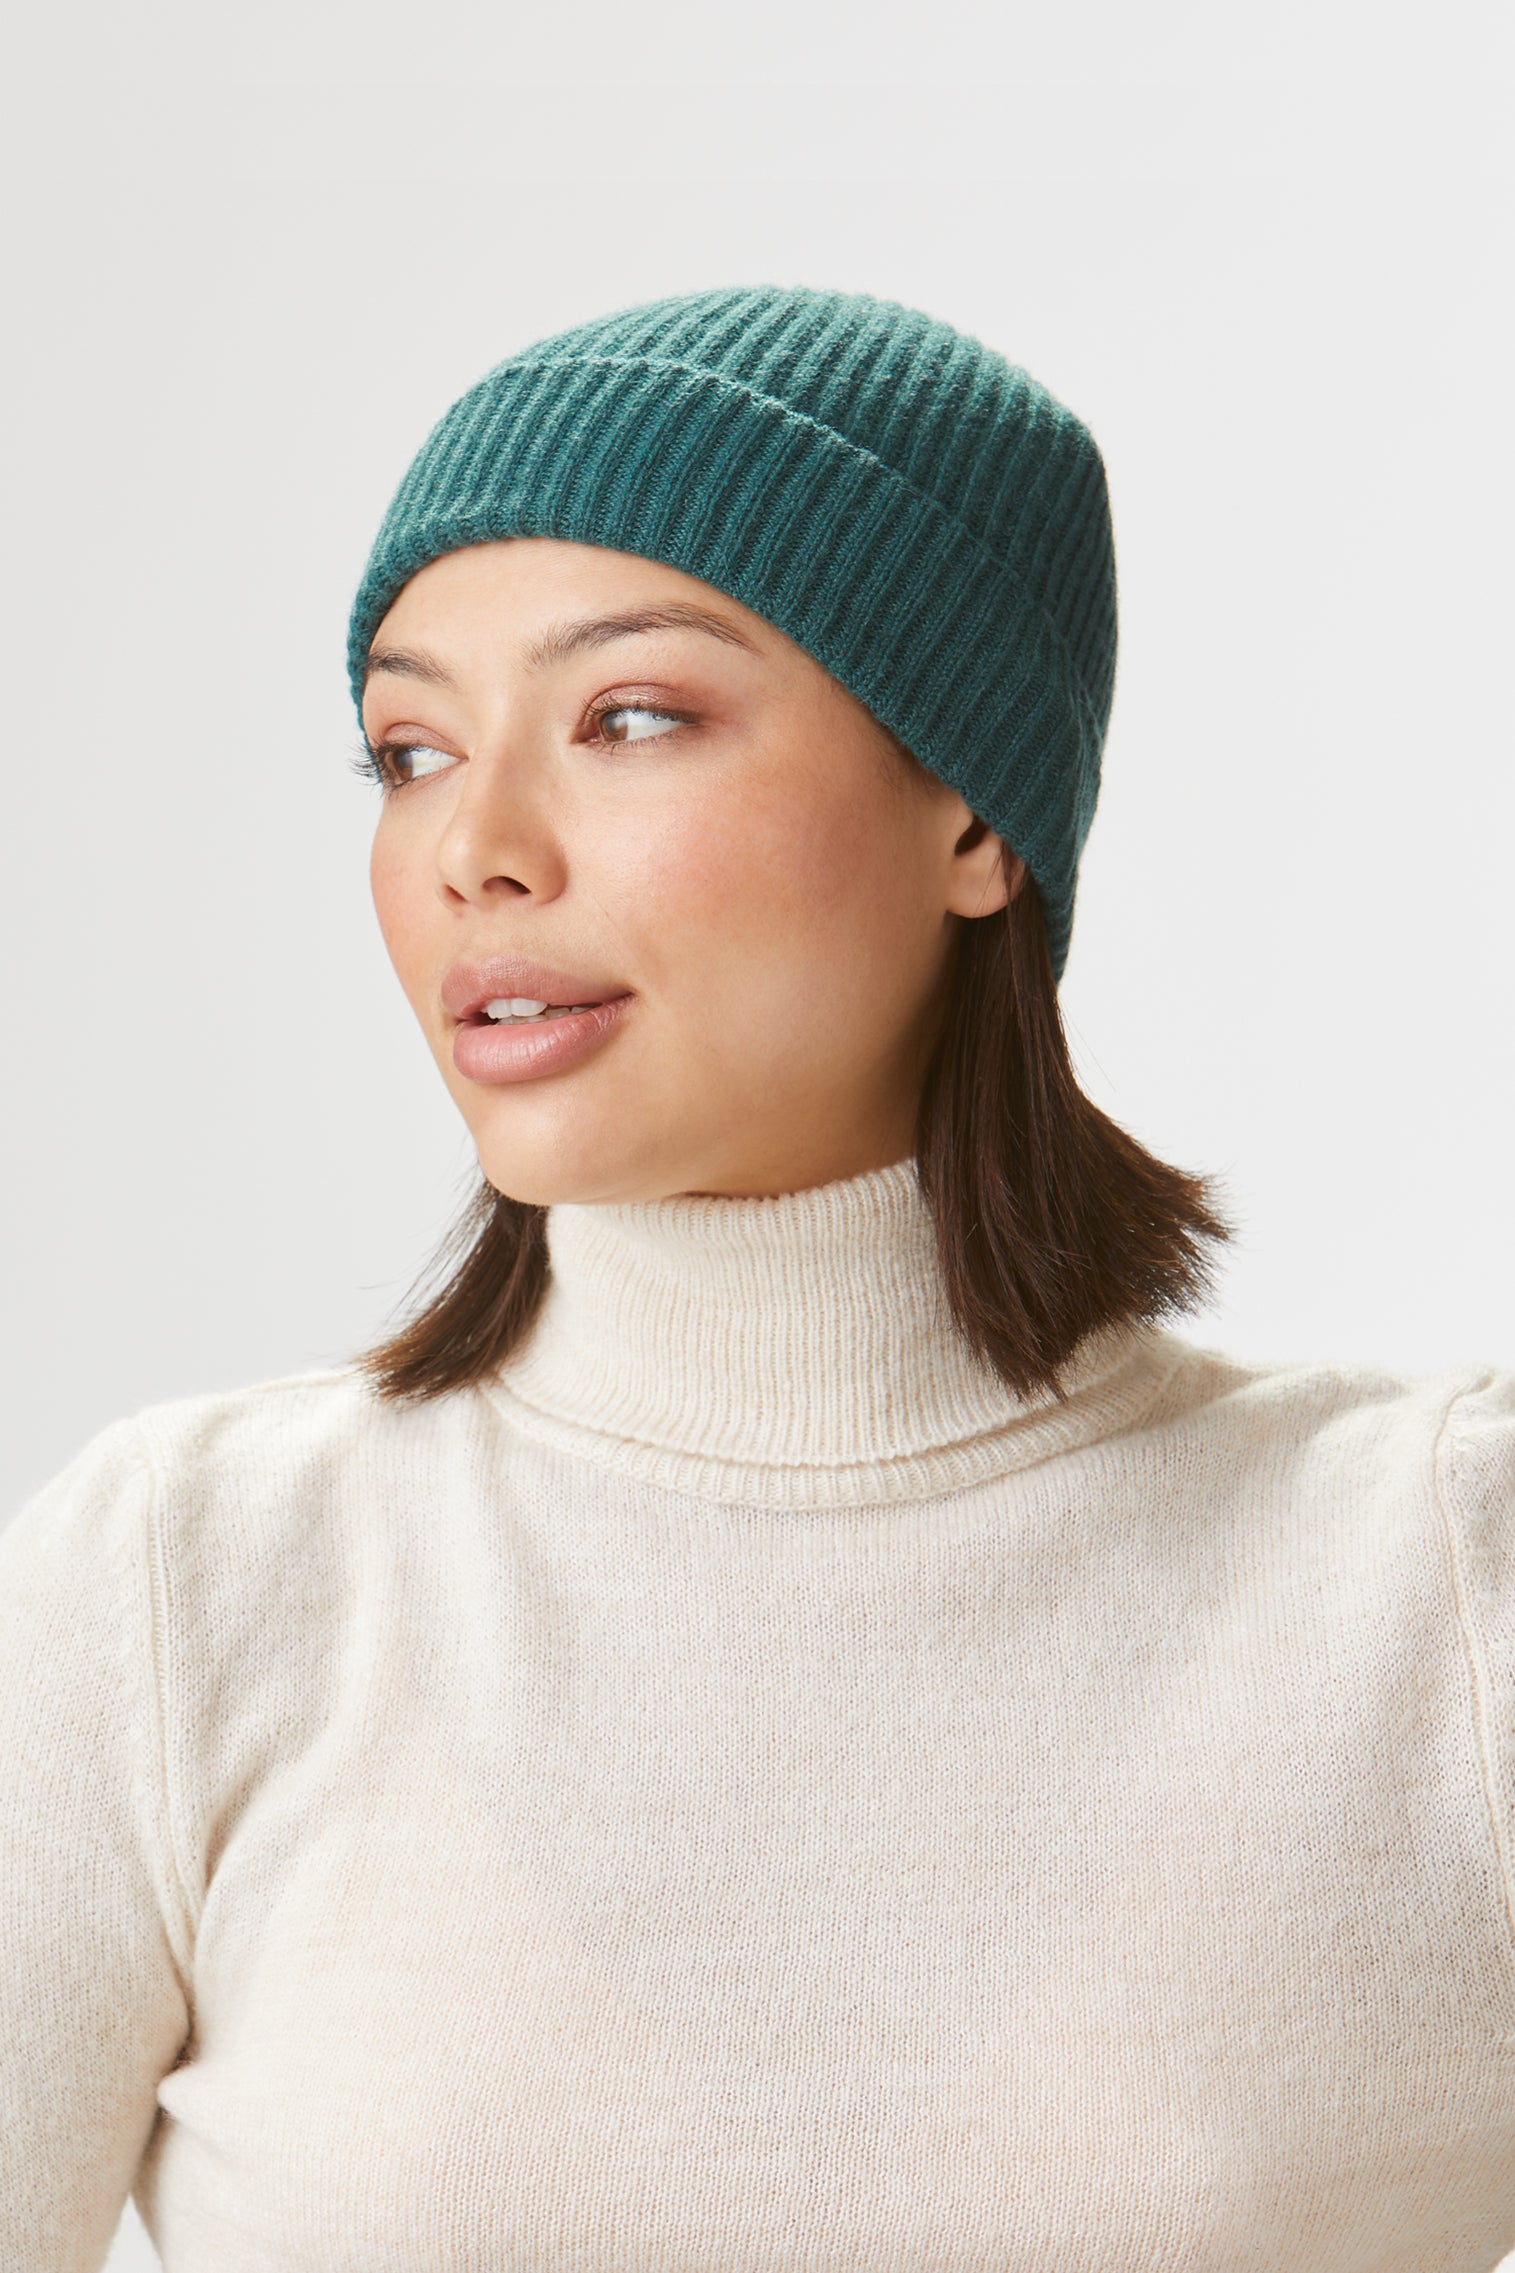 Green Cashmere Ski Beanie - Products - Lock & Co. Hatters London UK